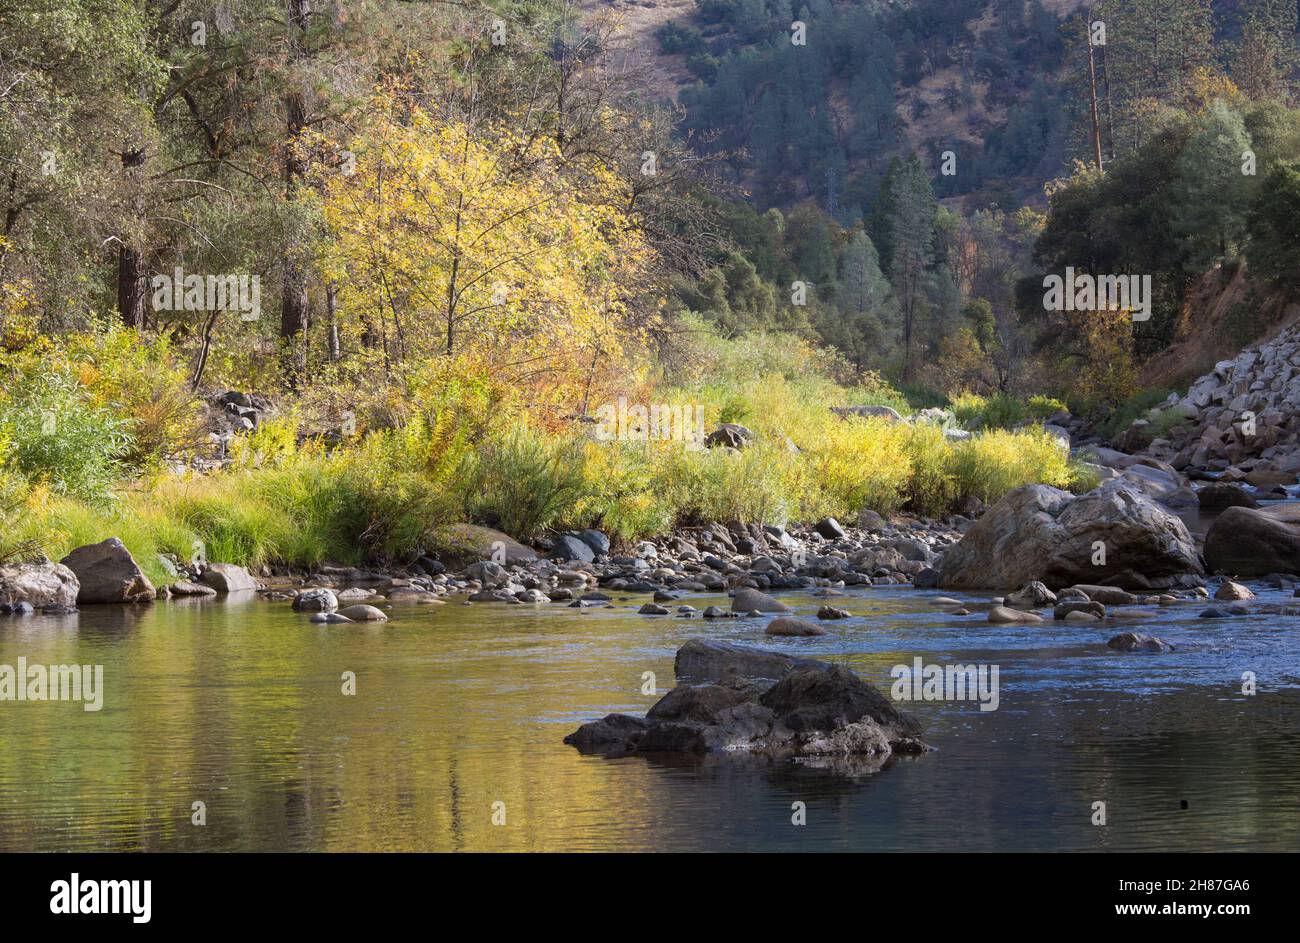 El Portal, California, USA. View across the tranquil waters of the Merced River downstream of Yosemite National Park, autumn. Stock Photo